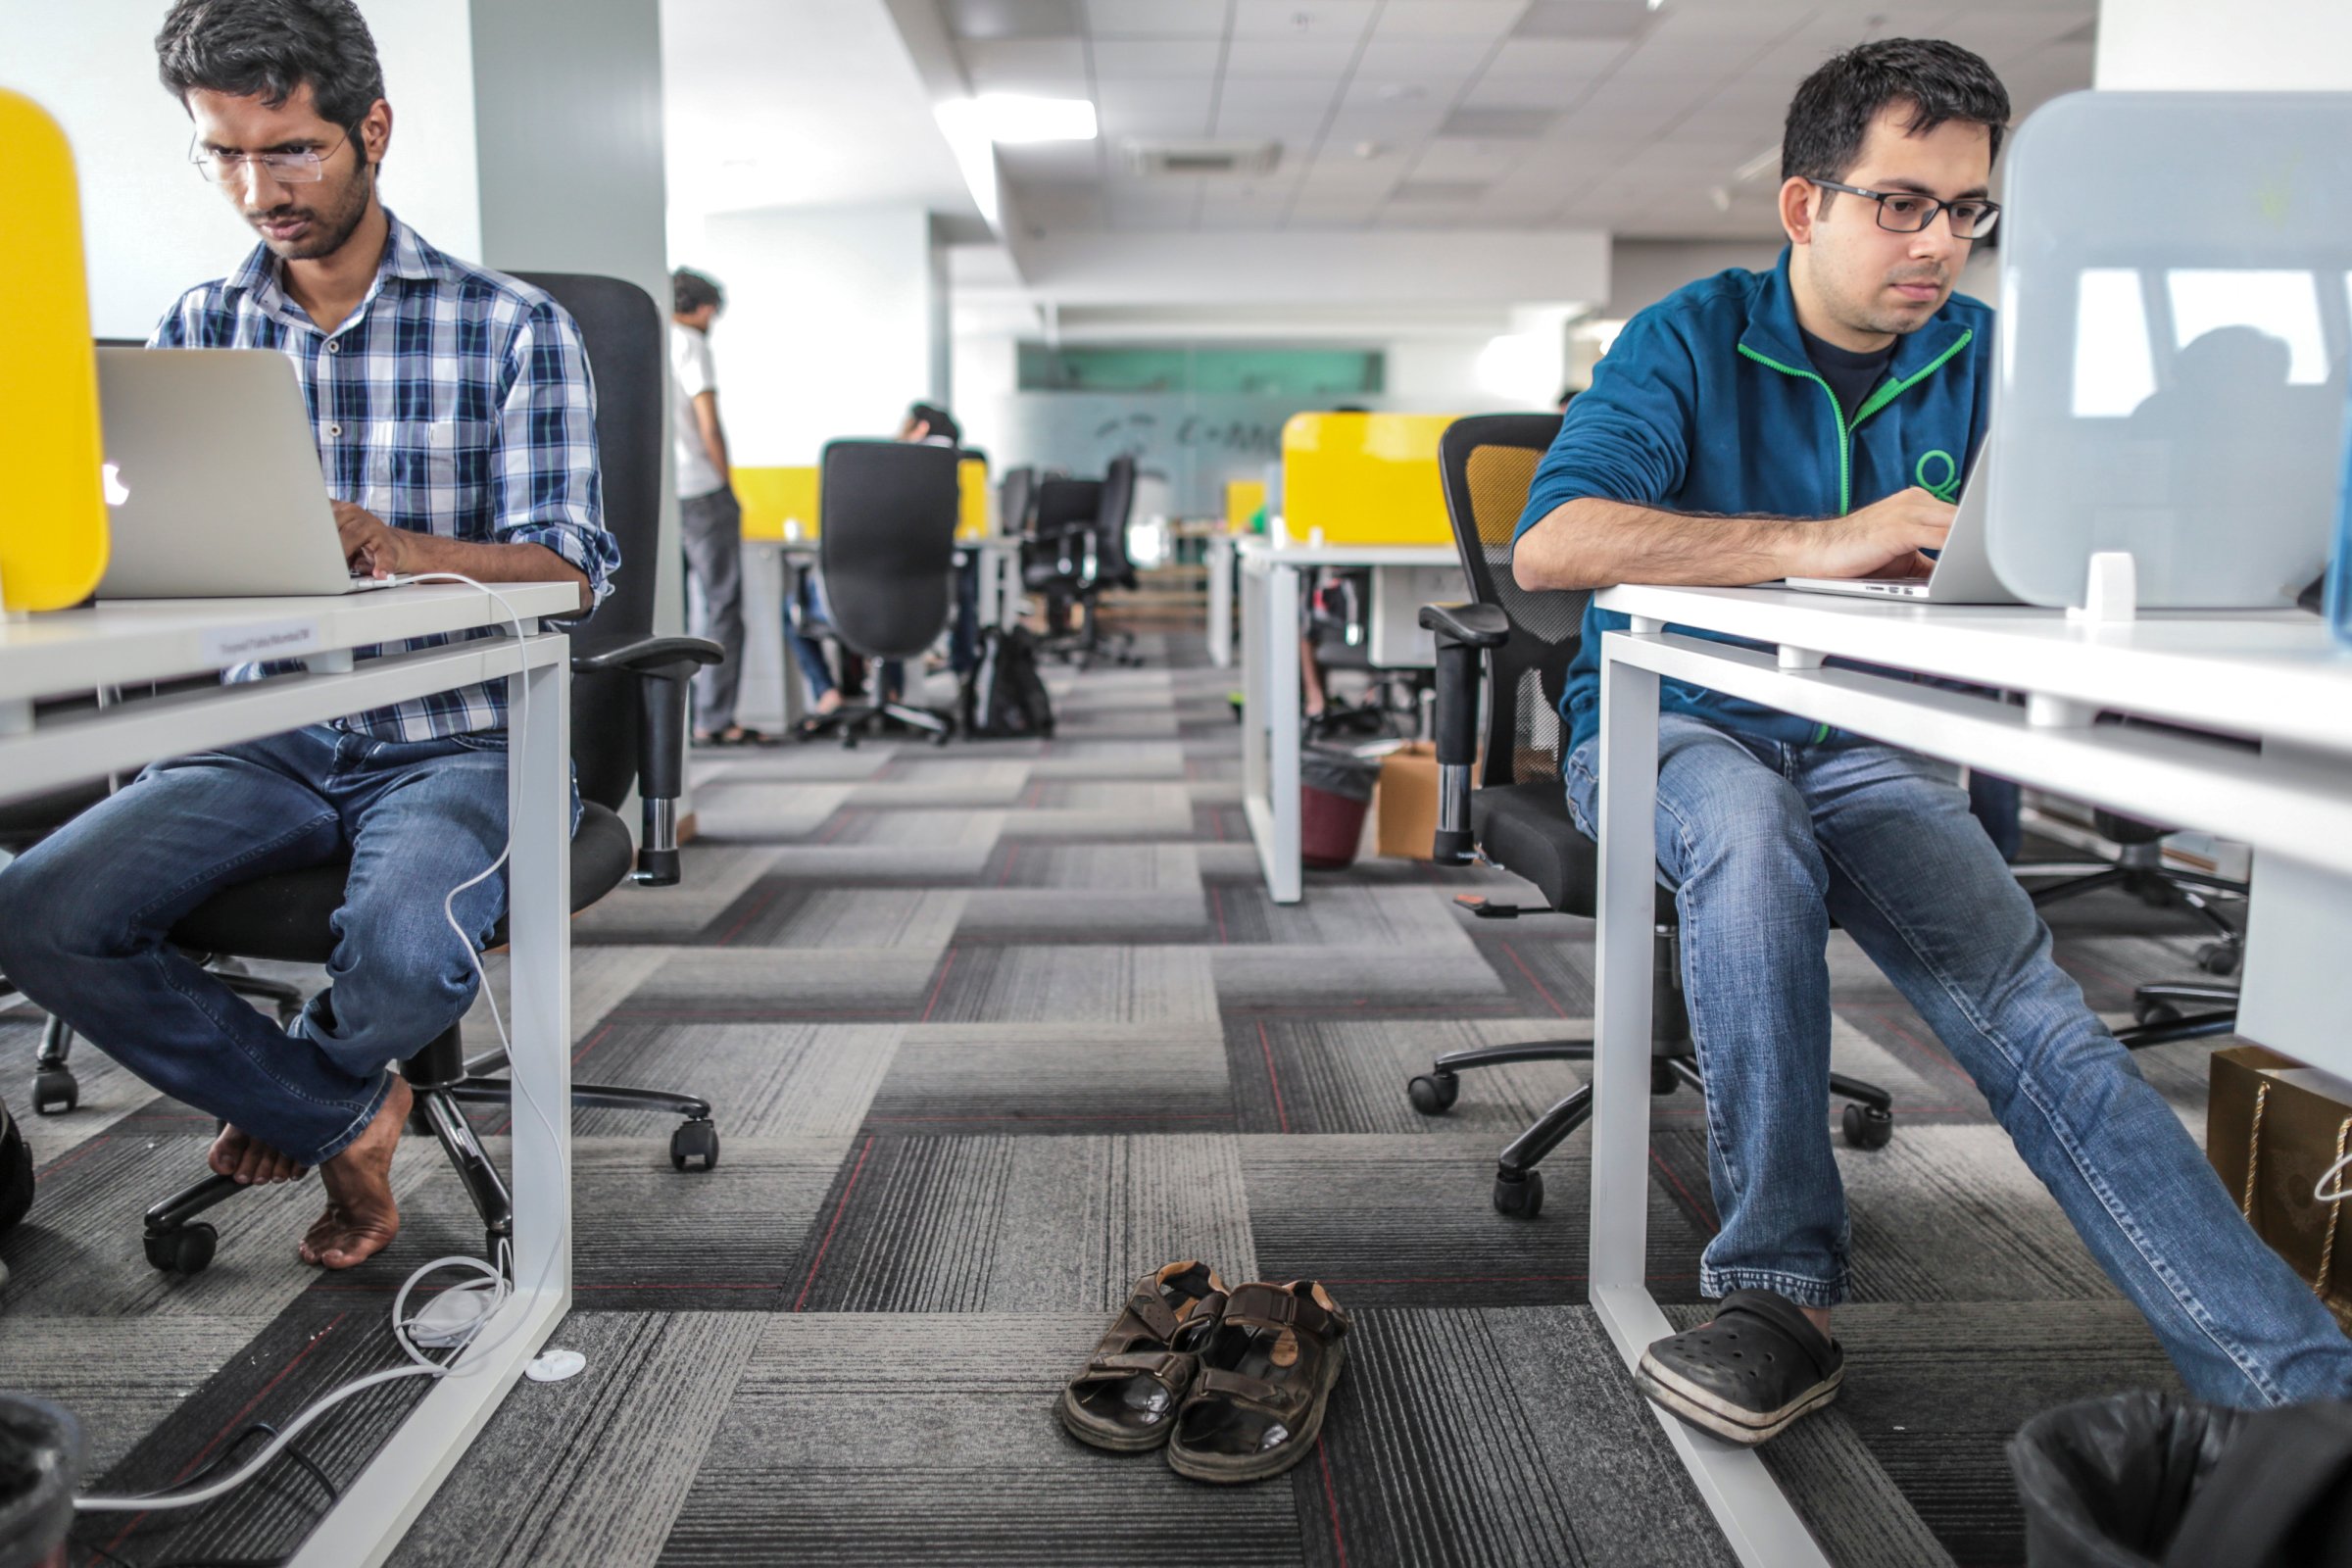 Tiny Owl employees work on laptop computers as pair of sandals sit on the floor inside the company's head office in Mumbai, India, on Monday, March. 9, 2015.